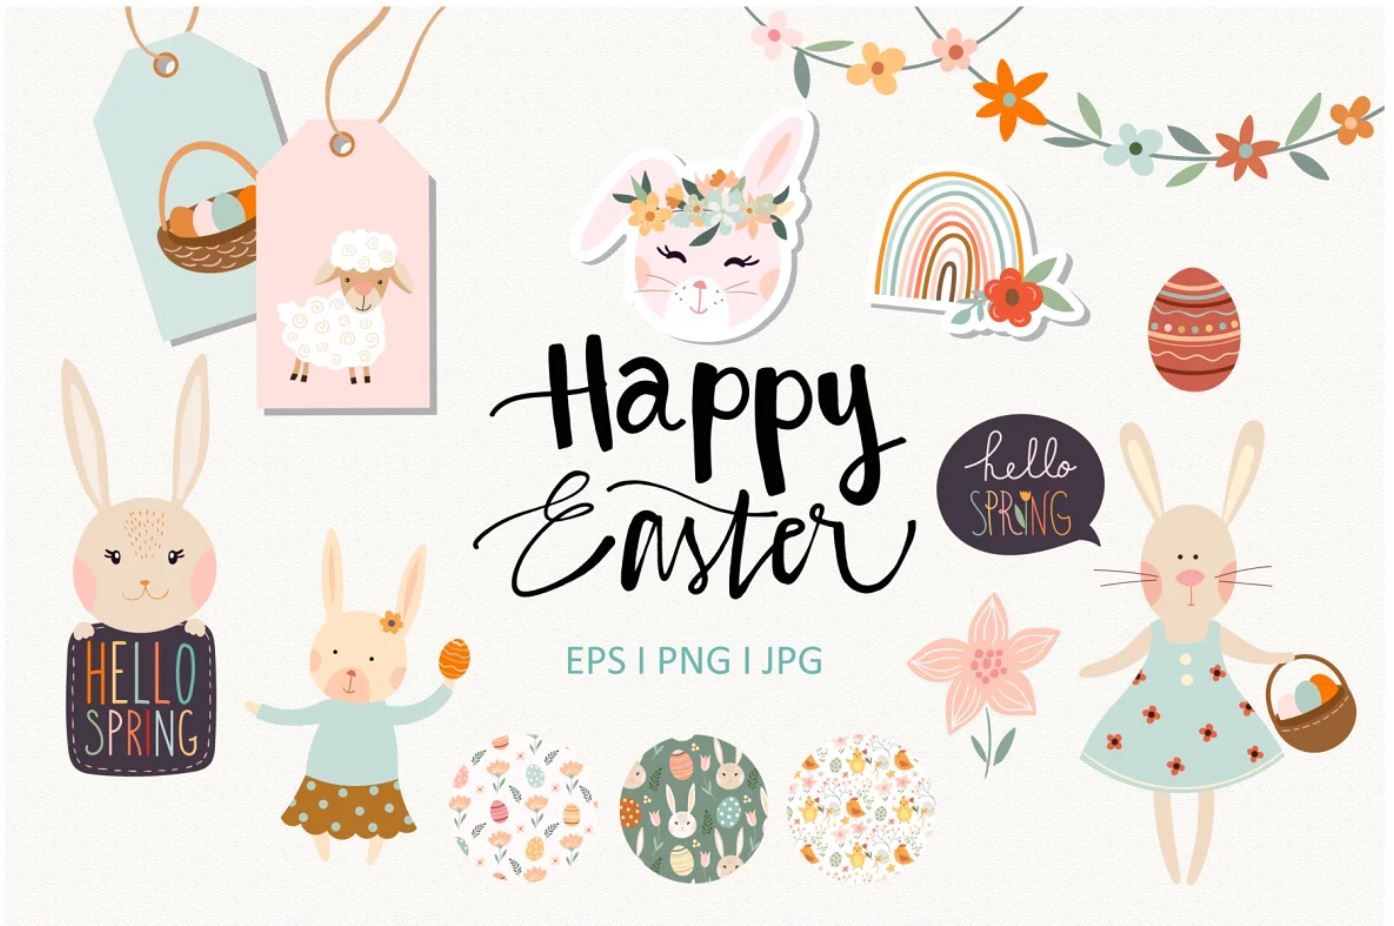 Personalized-Easter-cards